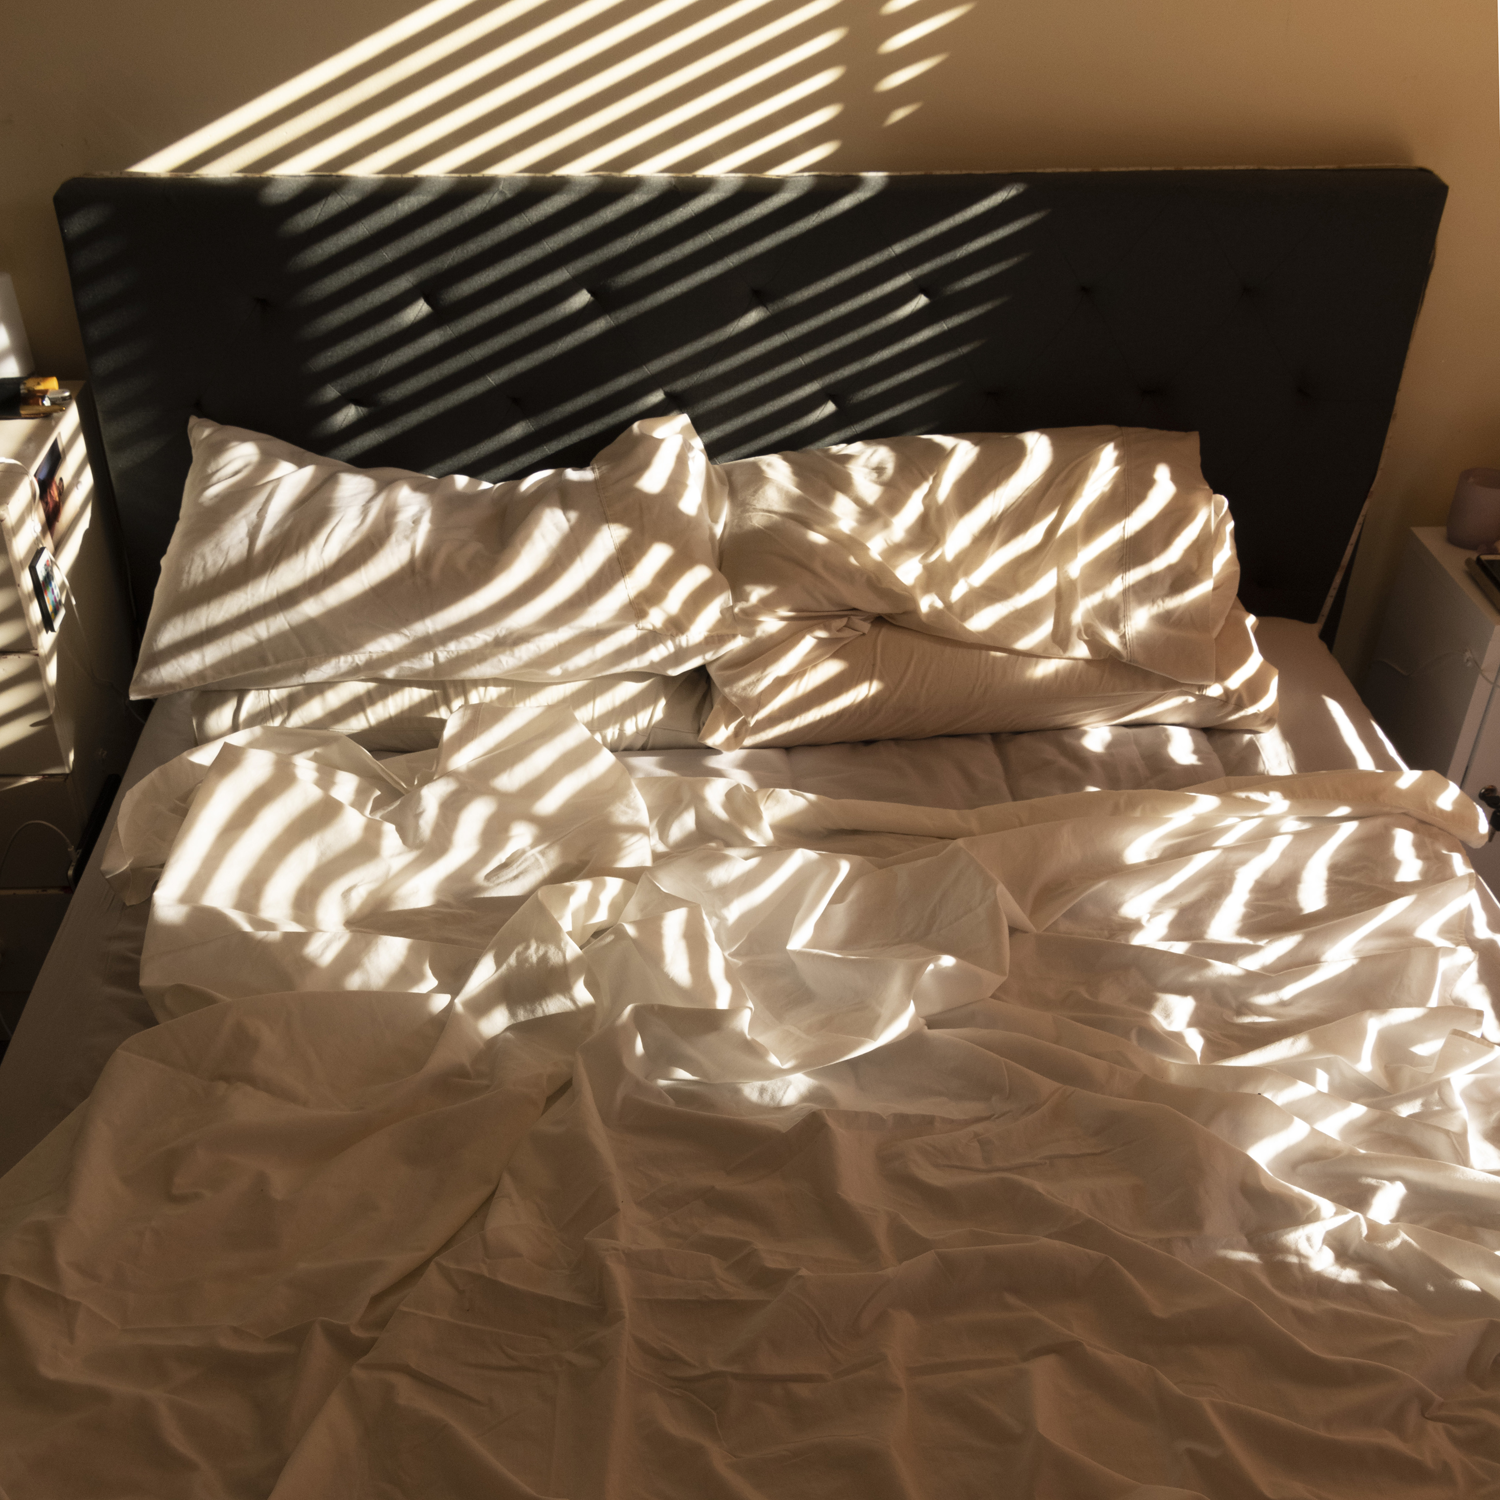 Colour photograph of empty bed with messy sheets bathed in golden light.